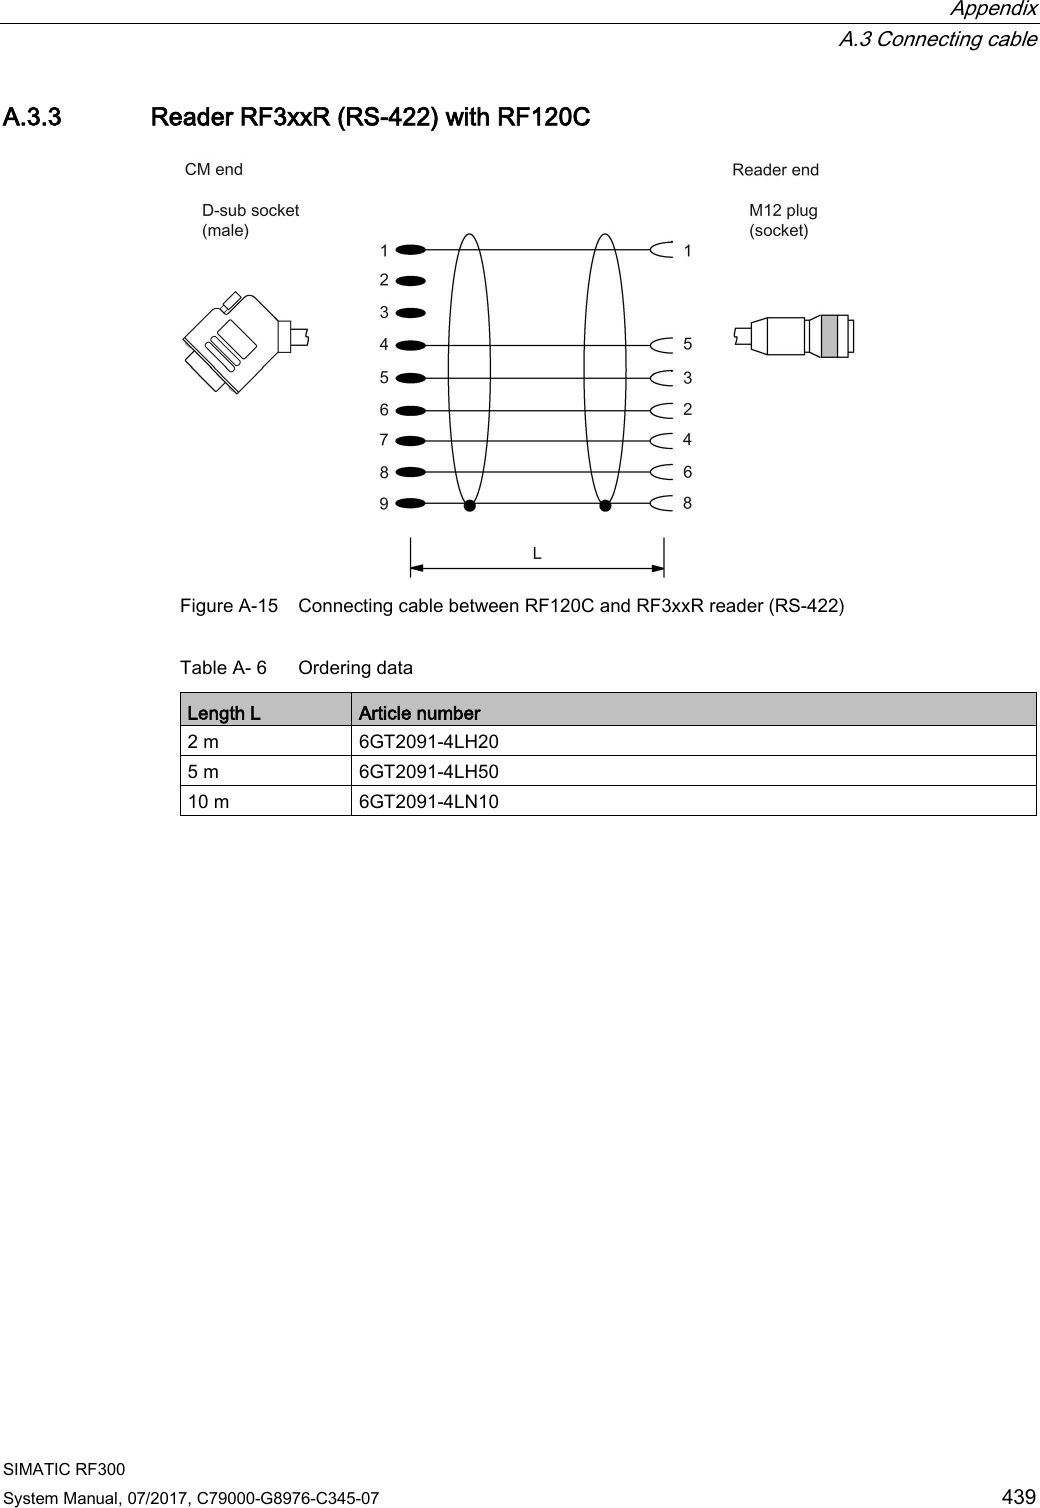  Appendix  A.3 Connecting cable SIMATIC RF300 System Manual, 07/2017, C79000-G8976-C345-07 439 A.3.3 Reader RF3xxR (RS-422) with RF120C  Figure A-15 Connecting cable between RF120C and RF3xxR reader (RS-422) Table A- 6  Ordering data Length L Article number 2 m 6GT2091-4LH20  5 m 6GT2091-4LH50  10 m 6GT2091-4LN10    